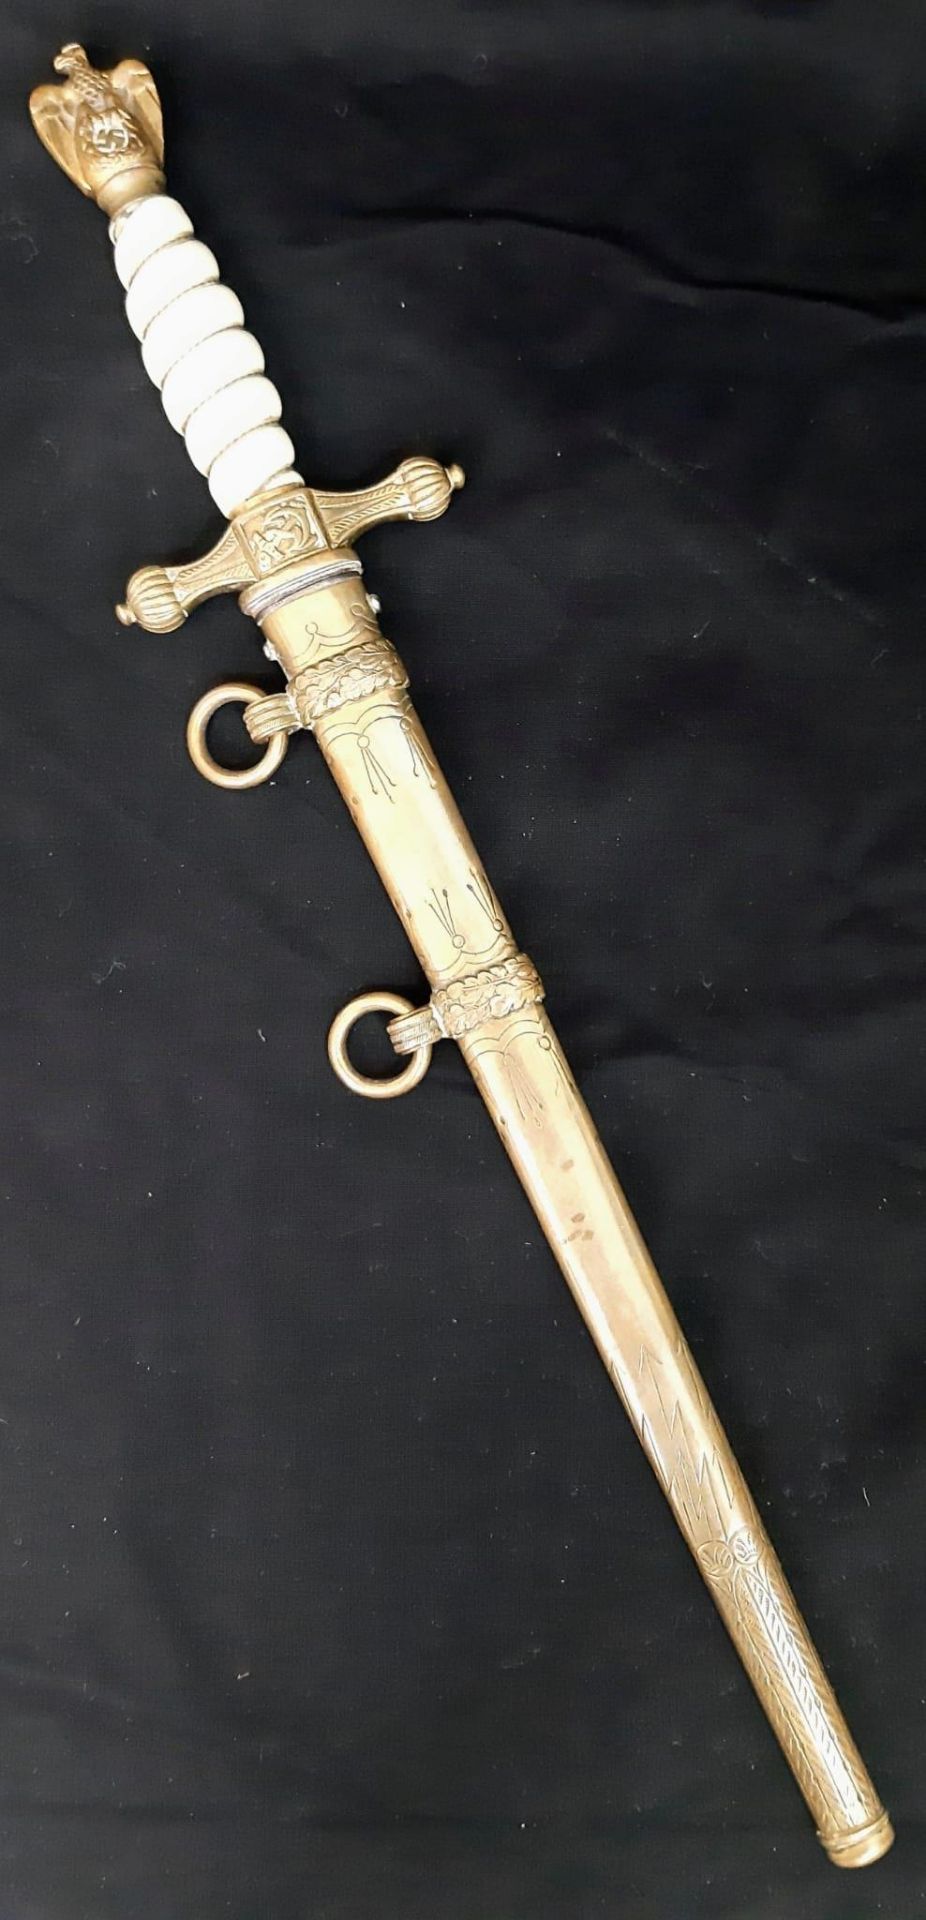 G.I Blade German Kriegsmarine Officers Dagger. Made after the war with many leftover parts for - Image 4 of 4